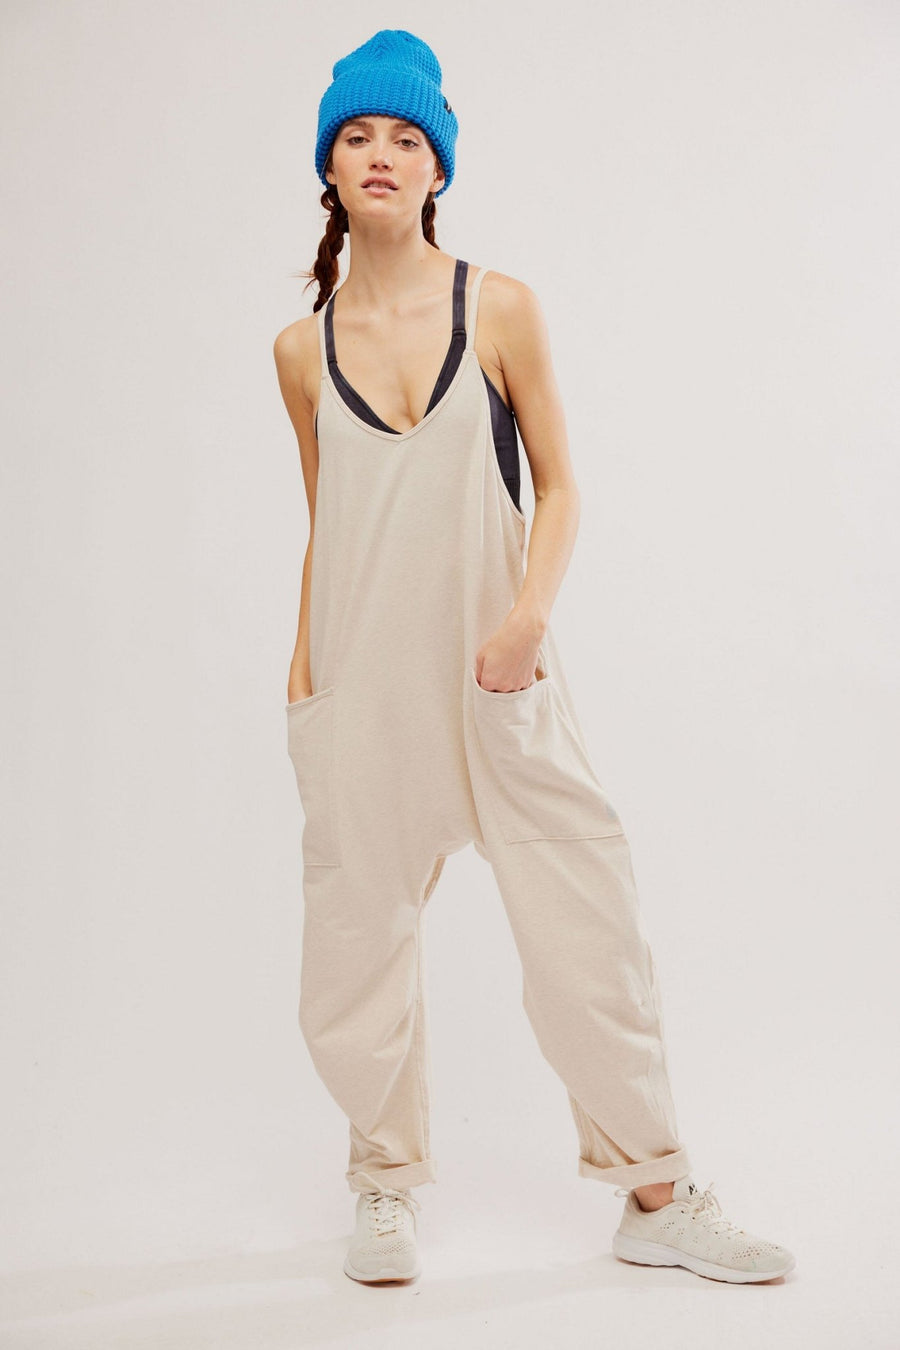 Hot Shot Onesie by Free People - oatmeal heather - Blue Sky Fashions & Lingerie